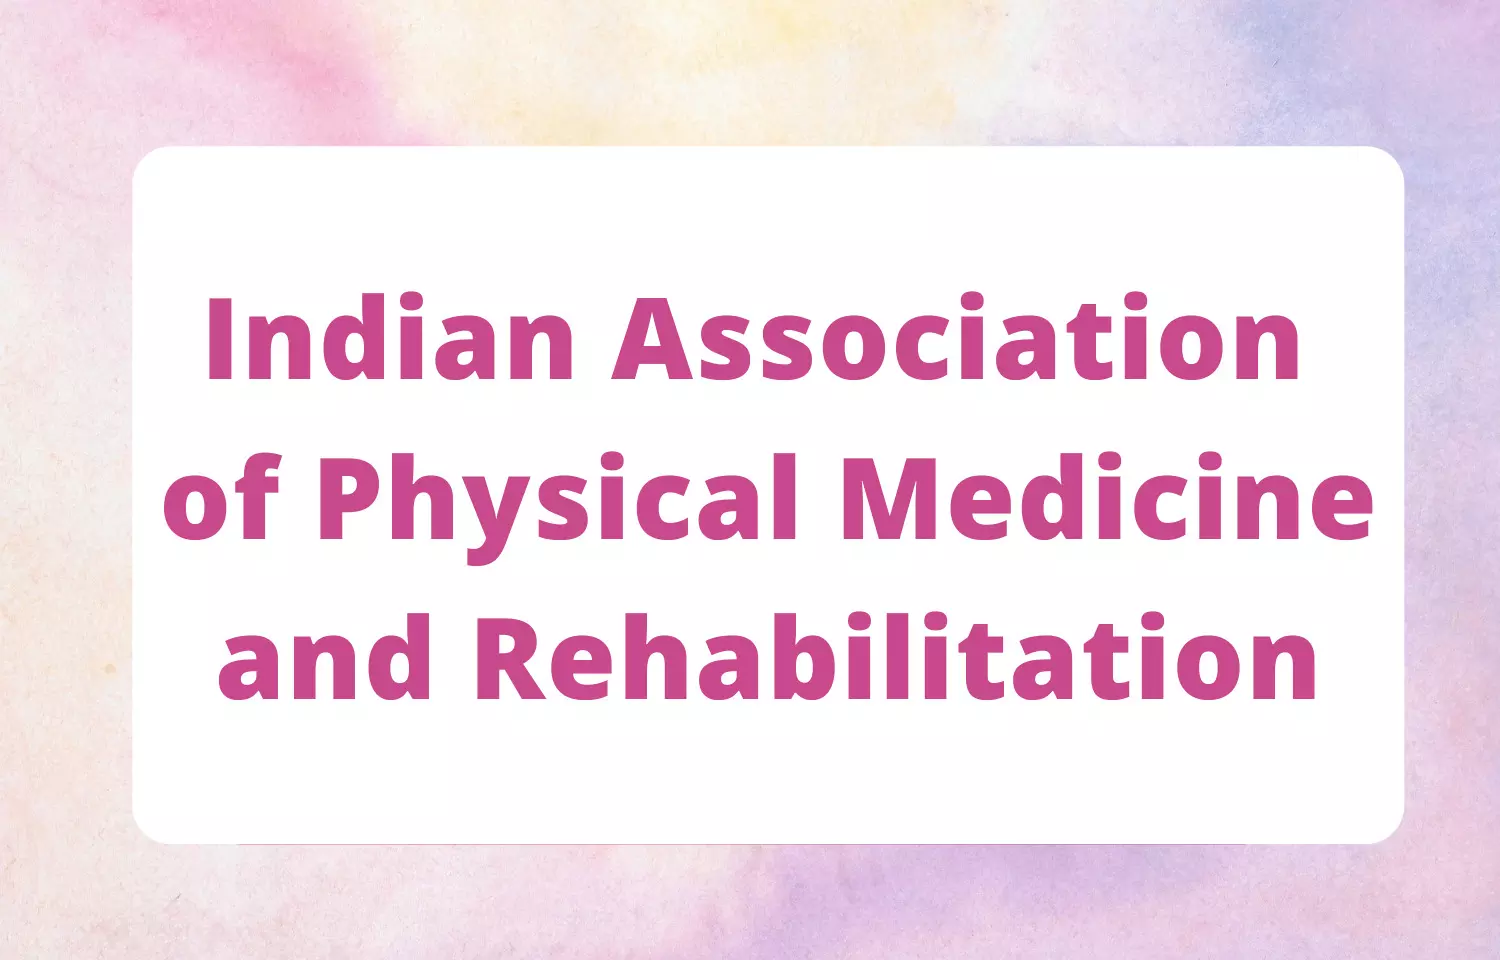 Indian Association of Physical Medicine and Rehabilitation (IAPMR) announces conference on POST-COVID complications